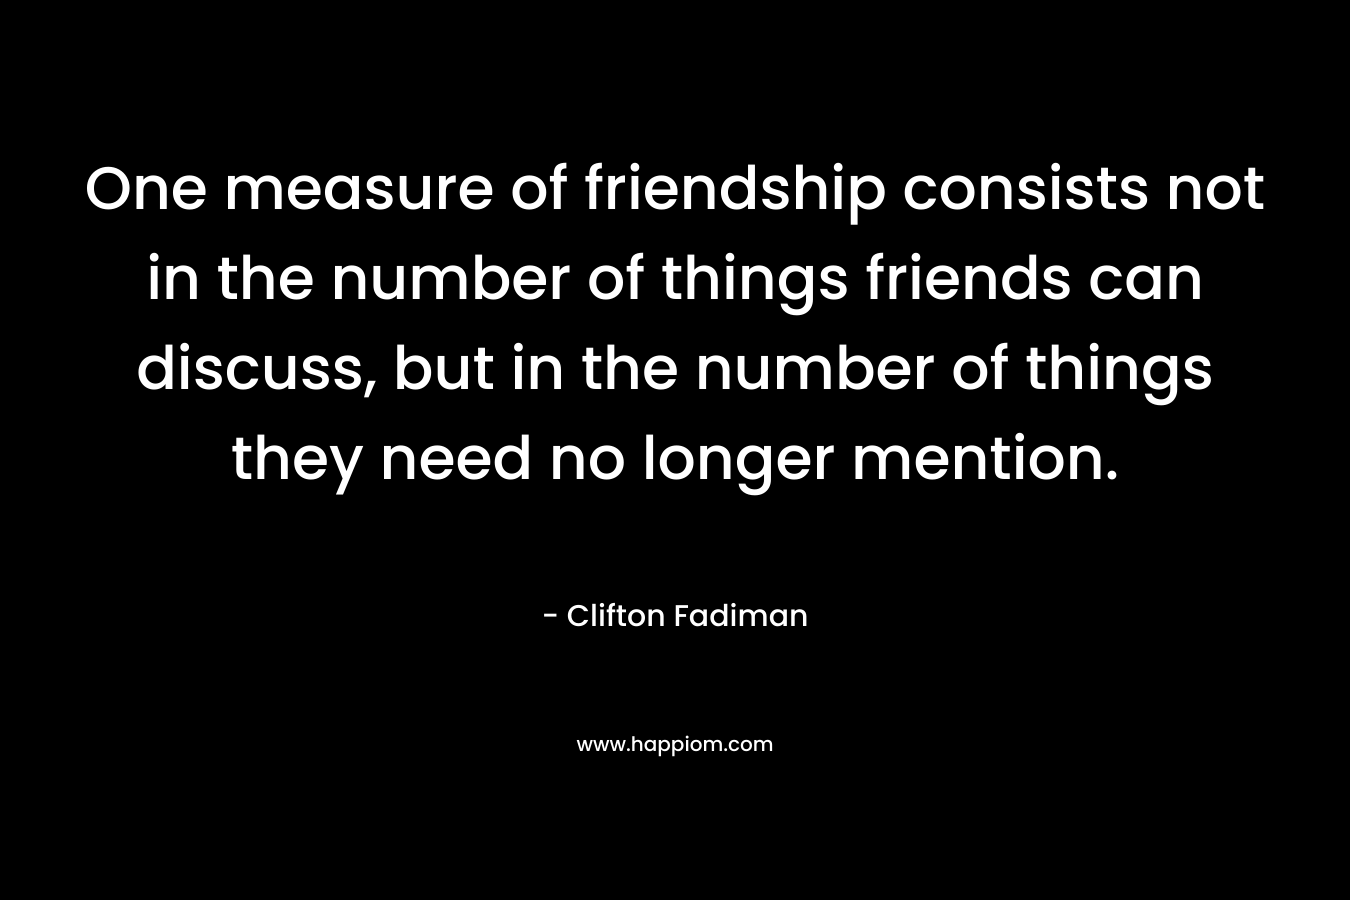 One measure of friendship consists not in the number of things friends can discuss, but in the number of things they need no longer mention. – Clifton Fadiman